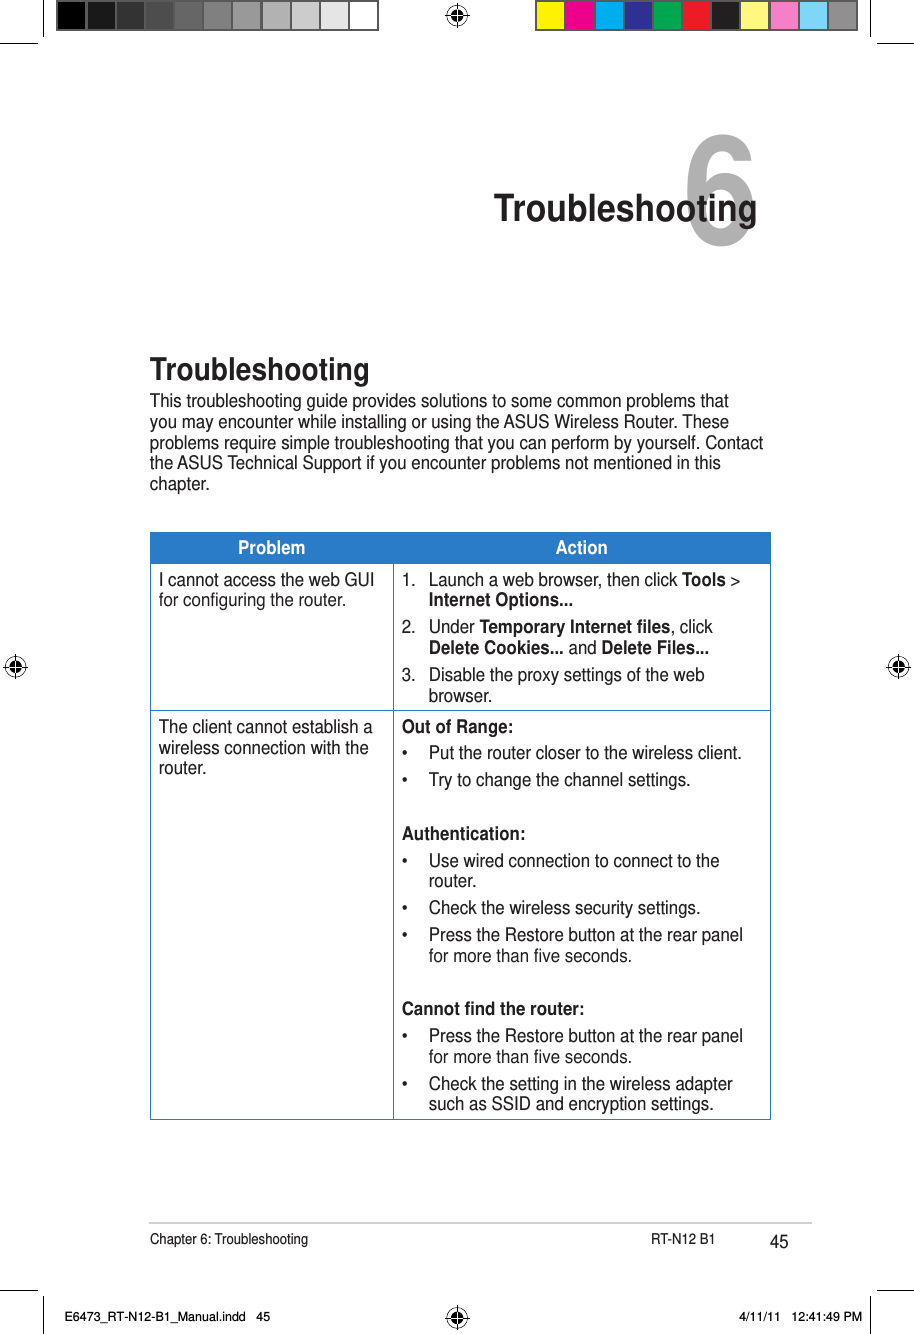 45Chapter 6: Troubleshooting                        RT-N12 B16TroubleshootingTroubleshootingThis troubleshooting guide provides solutions to some common problems that you may encounter while installing or using the ASUS Wireless Router. These problems require simple troubleshooting that you can perform by yourself. Contact the ASUS Technical Support if you encounter problems not mentioned in this chapter.Problem ActionI cannot access the web GUI for conguring the router.1.  Launch a web browser, then click Tools &gt; Internet Options...2.  Under Temporary Internet les, click Delete Cookies... and Delete Files...3.  Disable the proxy settings of the web browser.The client cannot establish a wireless connection with the router.Out of Range:•  Put the router closer to the wireless client.•  Try to change the channel settings.Authentication:•  Use wired connection to connect to the router.•  Check the wireless security settings.•  Press the Restore button at the rear panel for more than ve seconds.Cannot nd the router:•  Press the Restore button at the rear panel for more than ve seconds.•  Check the setting in the wireless adapter such as SSID and encryption settings.E6473_RT-N12-B1_Manual.indd   45 4/11/11   12:41:49 PM